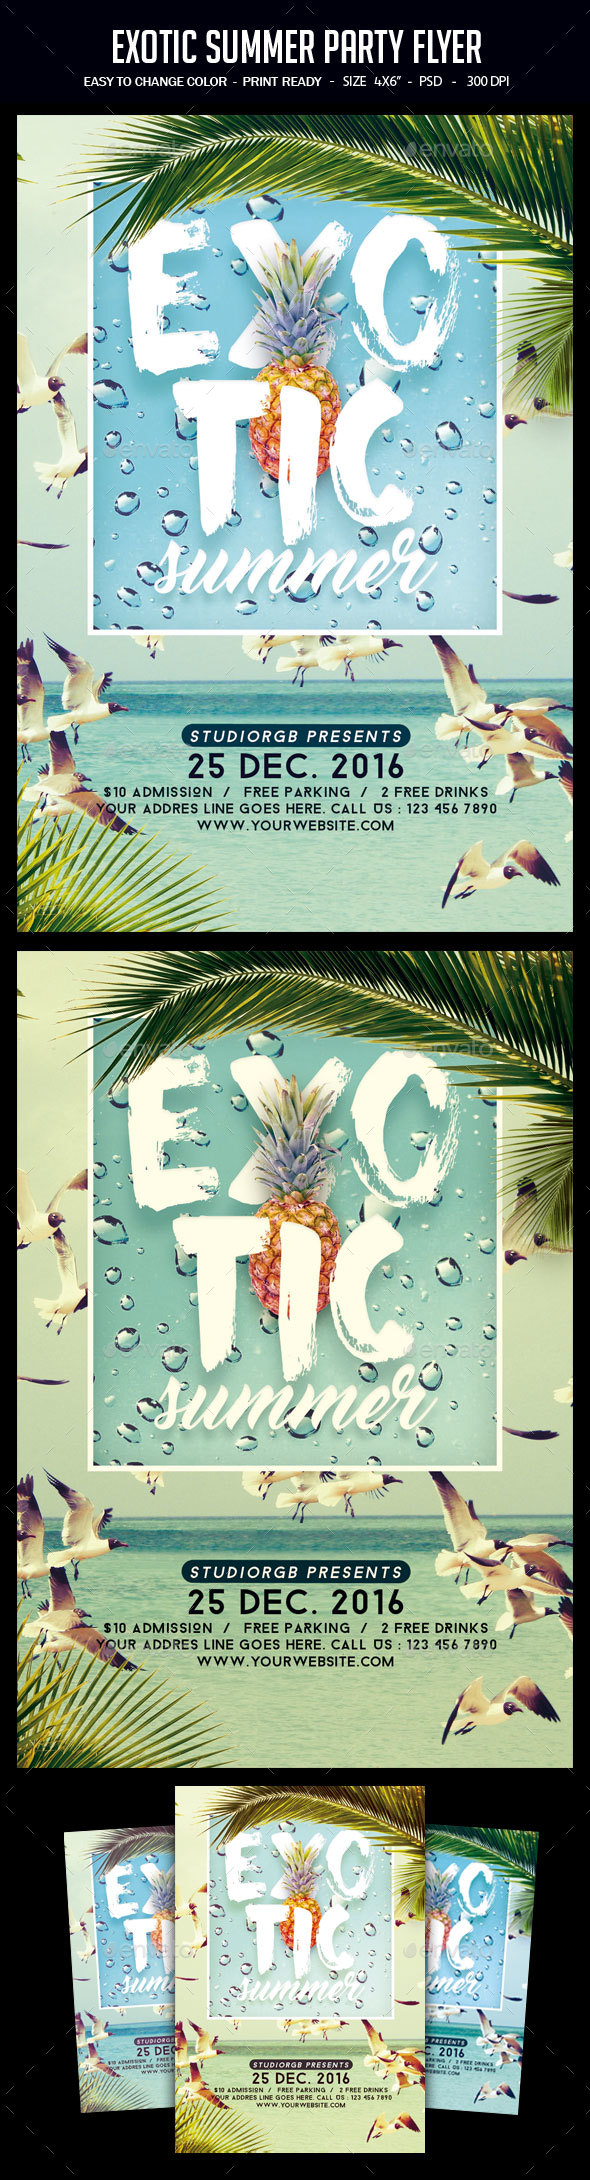 Exotic Summer Party Flyer